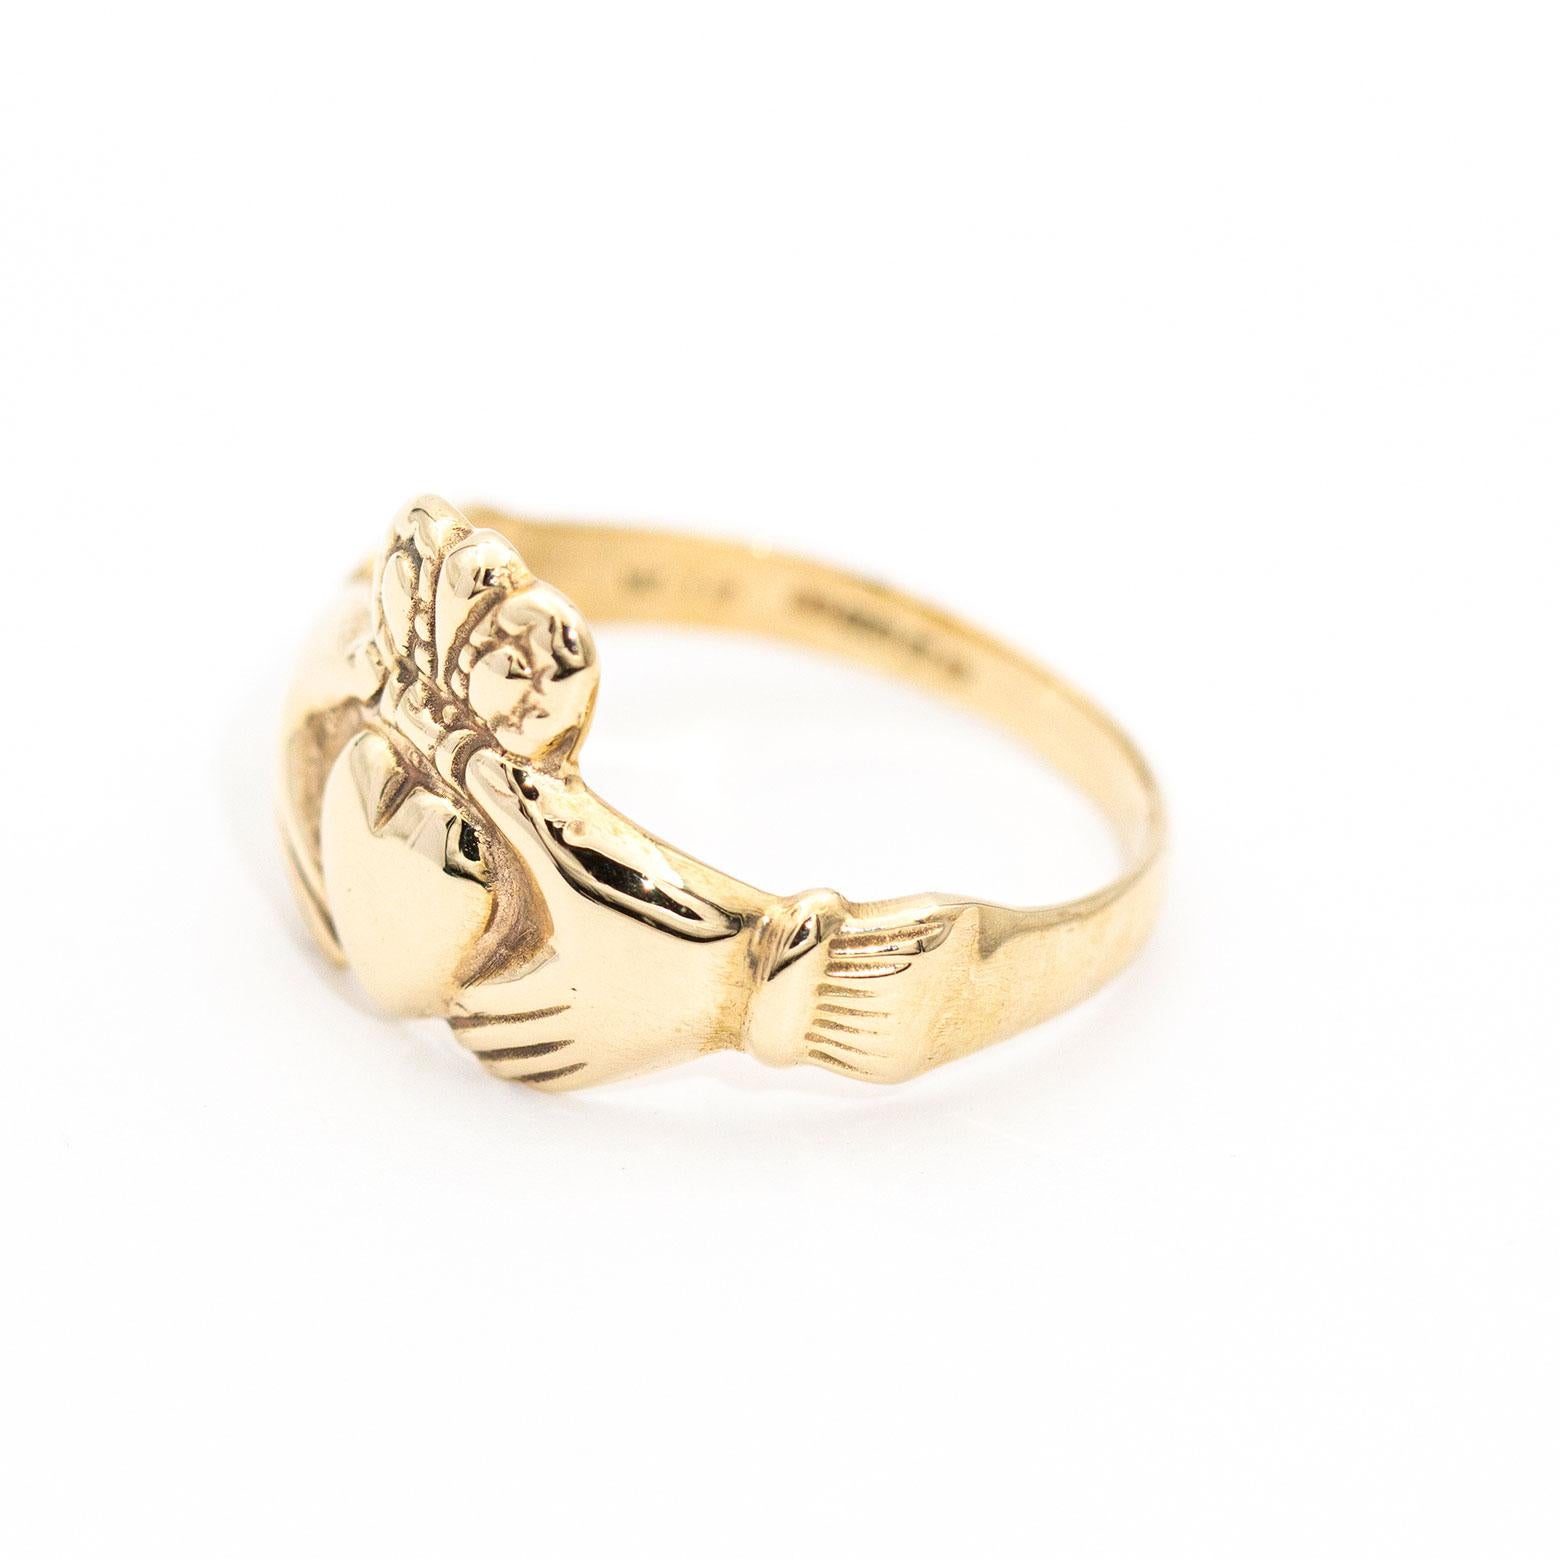 The vintage Irish Claddagh Ring is forged in 9ct yellow gold & features the infamous hands holding the heart, an Irish symbolism for love & hope. We named this romantic piece The Harley Ring.

The Harley Ring belongs to our carefully curated